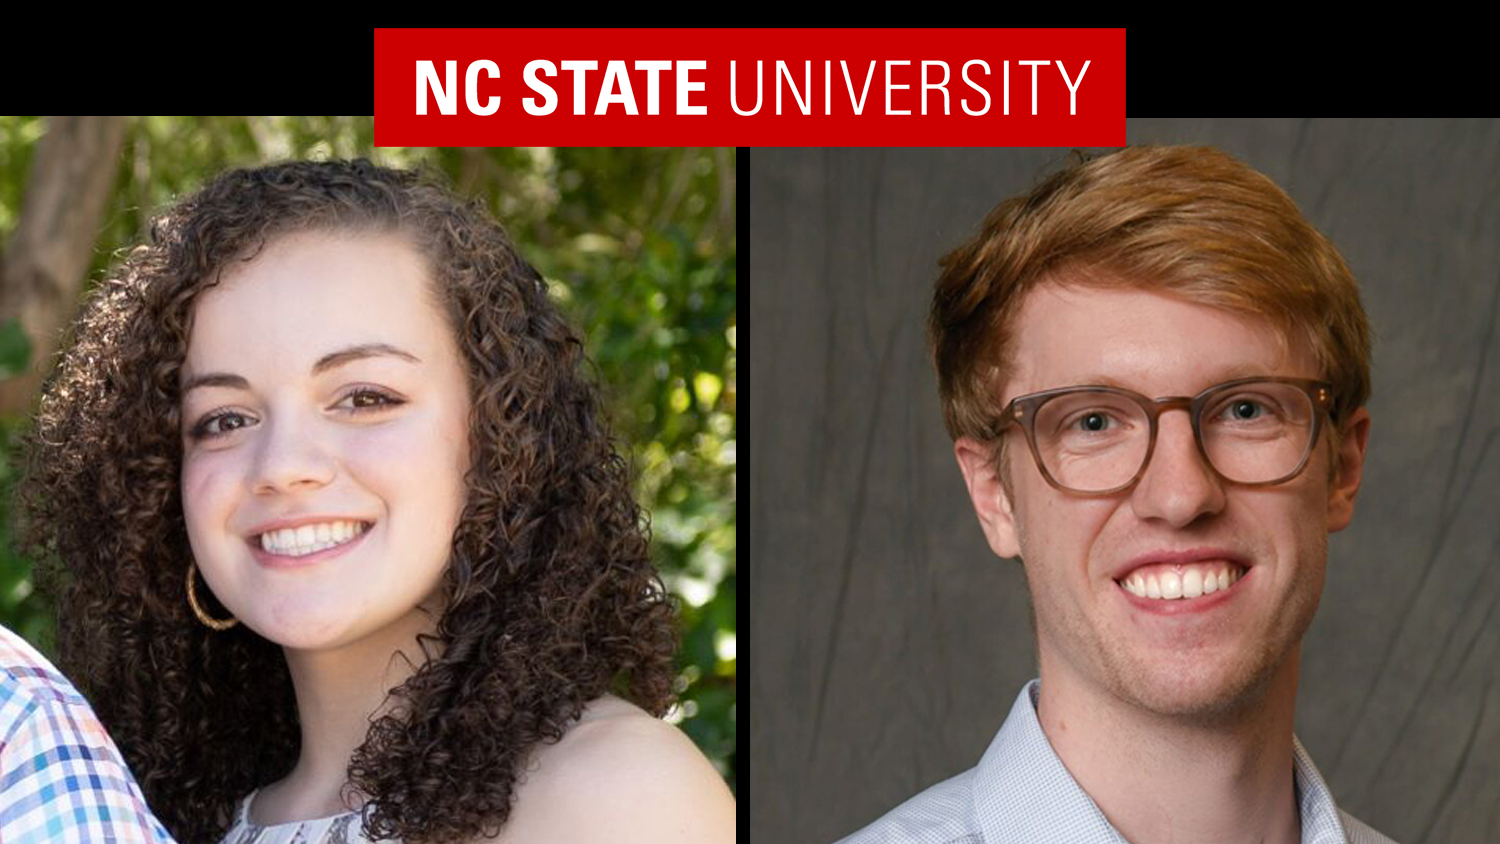 A photo of Olivia Dioli and Kevan Knizner headshots below the NC State University red logo